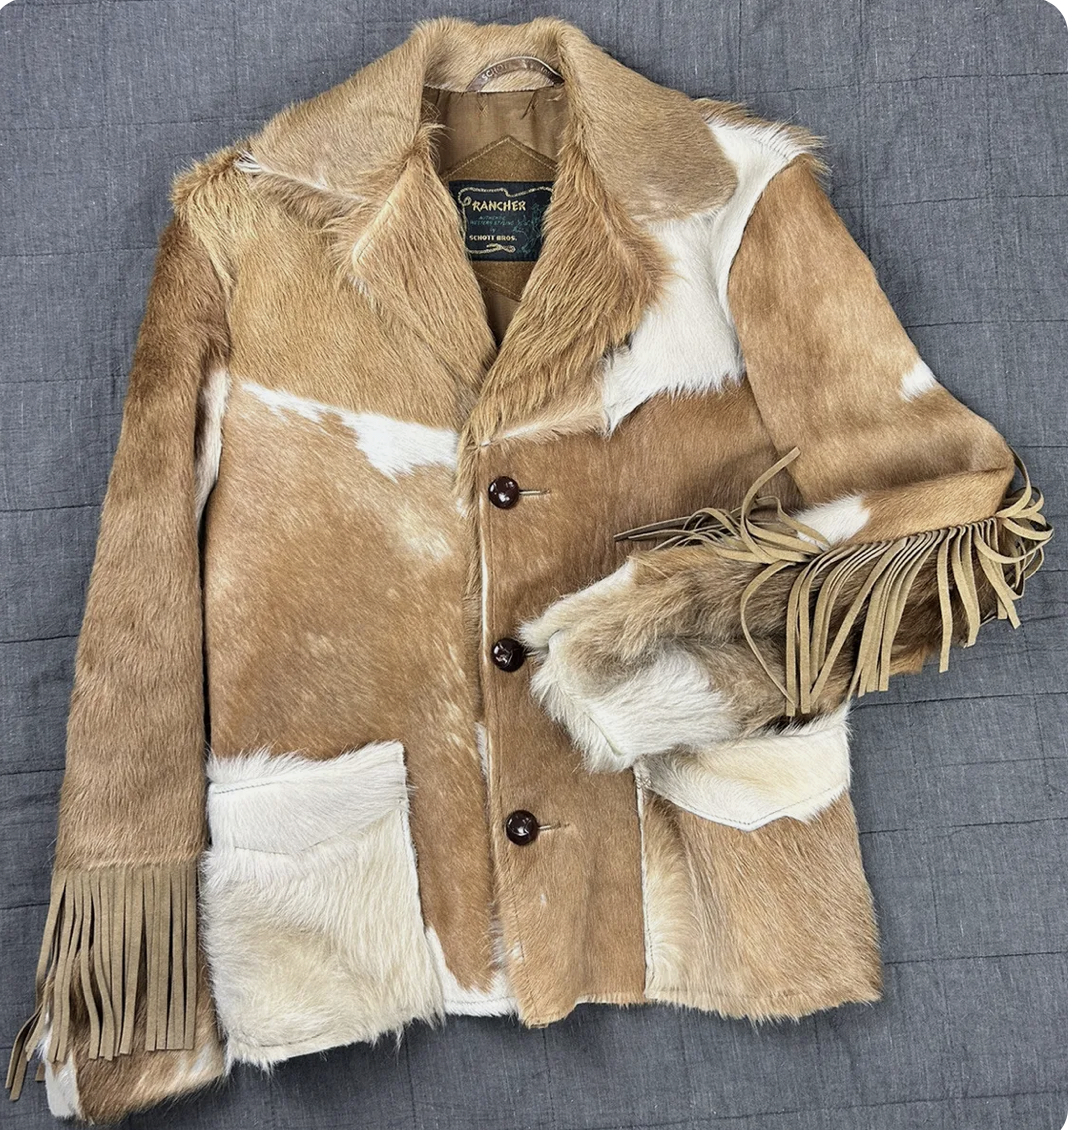 Finds and Deals - Leather Jacket Edition | Page 1116 | The Fedora Lounge